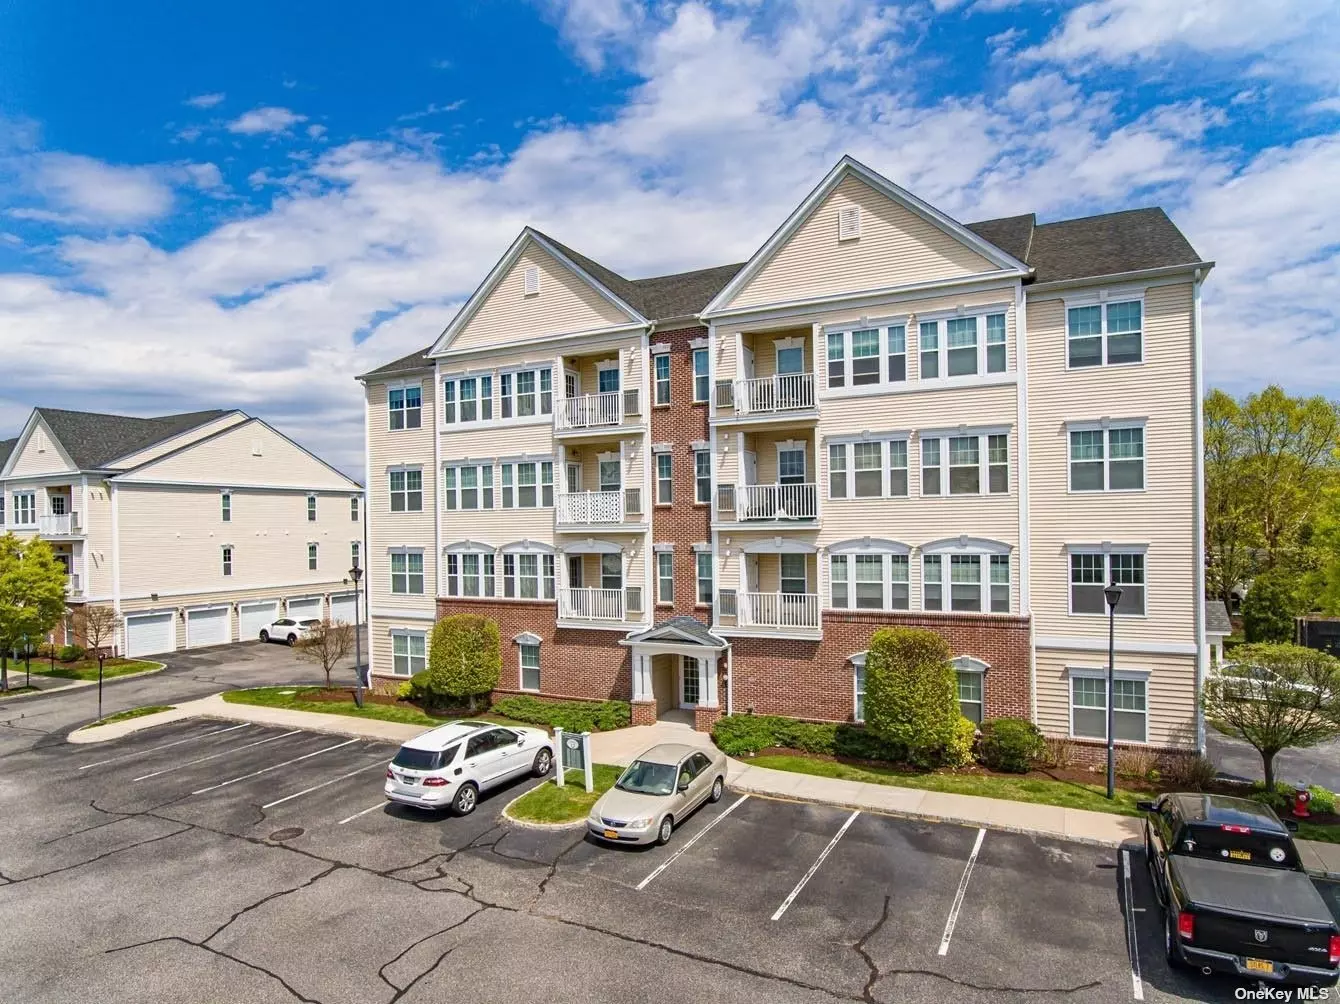 Diamond condo located in Courthouse Commons. Second floor unit entry foyer, eat in kitchen with granite countertops and stainless steel appliances, open floor plan, living room, dining room, balcony, premiere bedroom with walk-in closet and full bath, second bedroom and second bathroom.